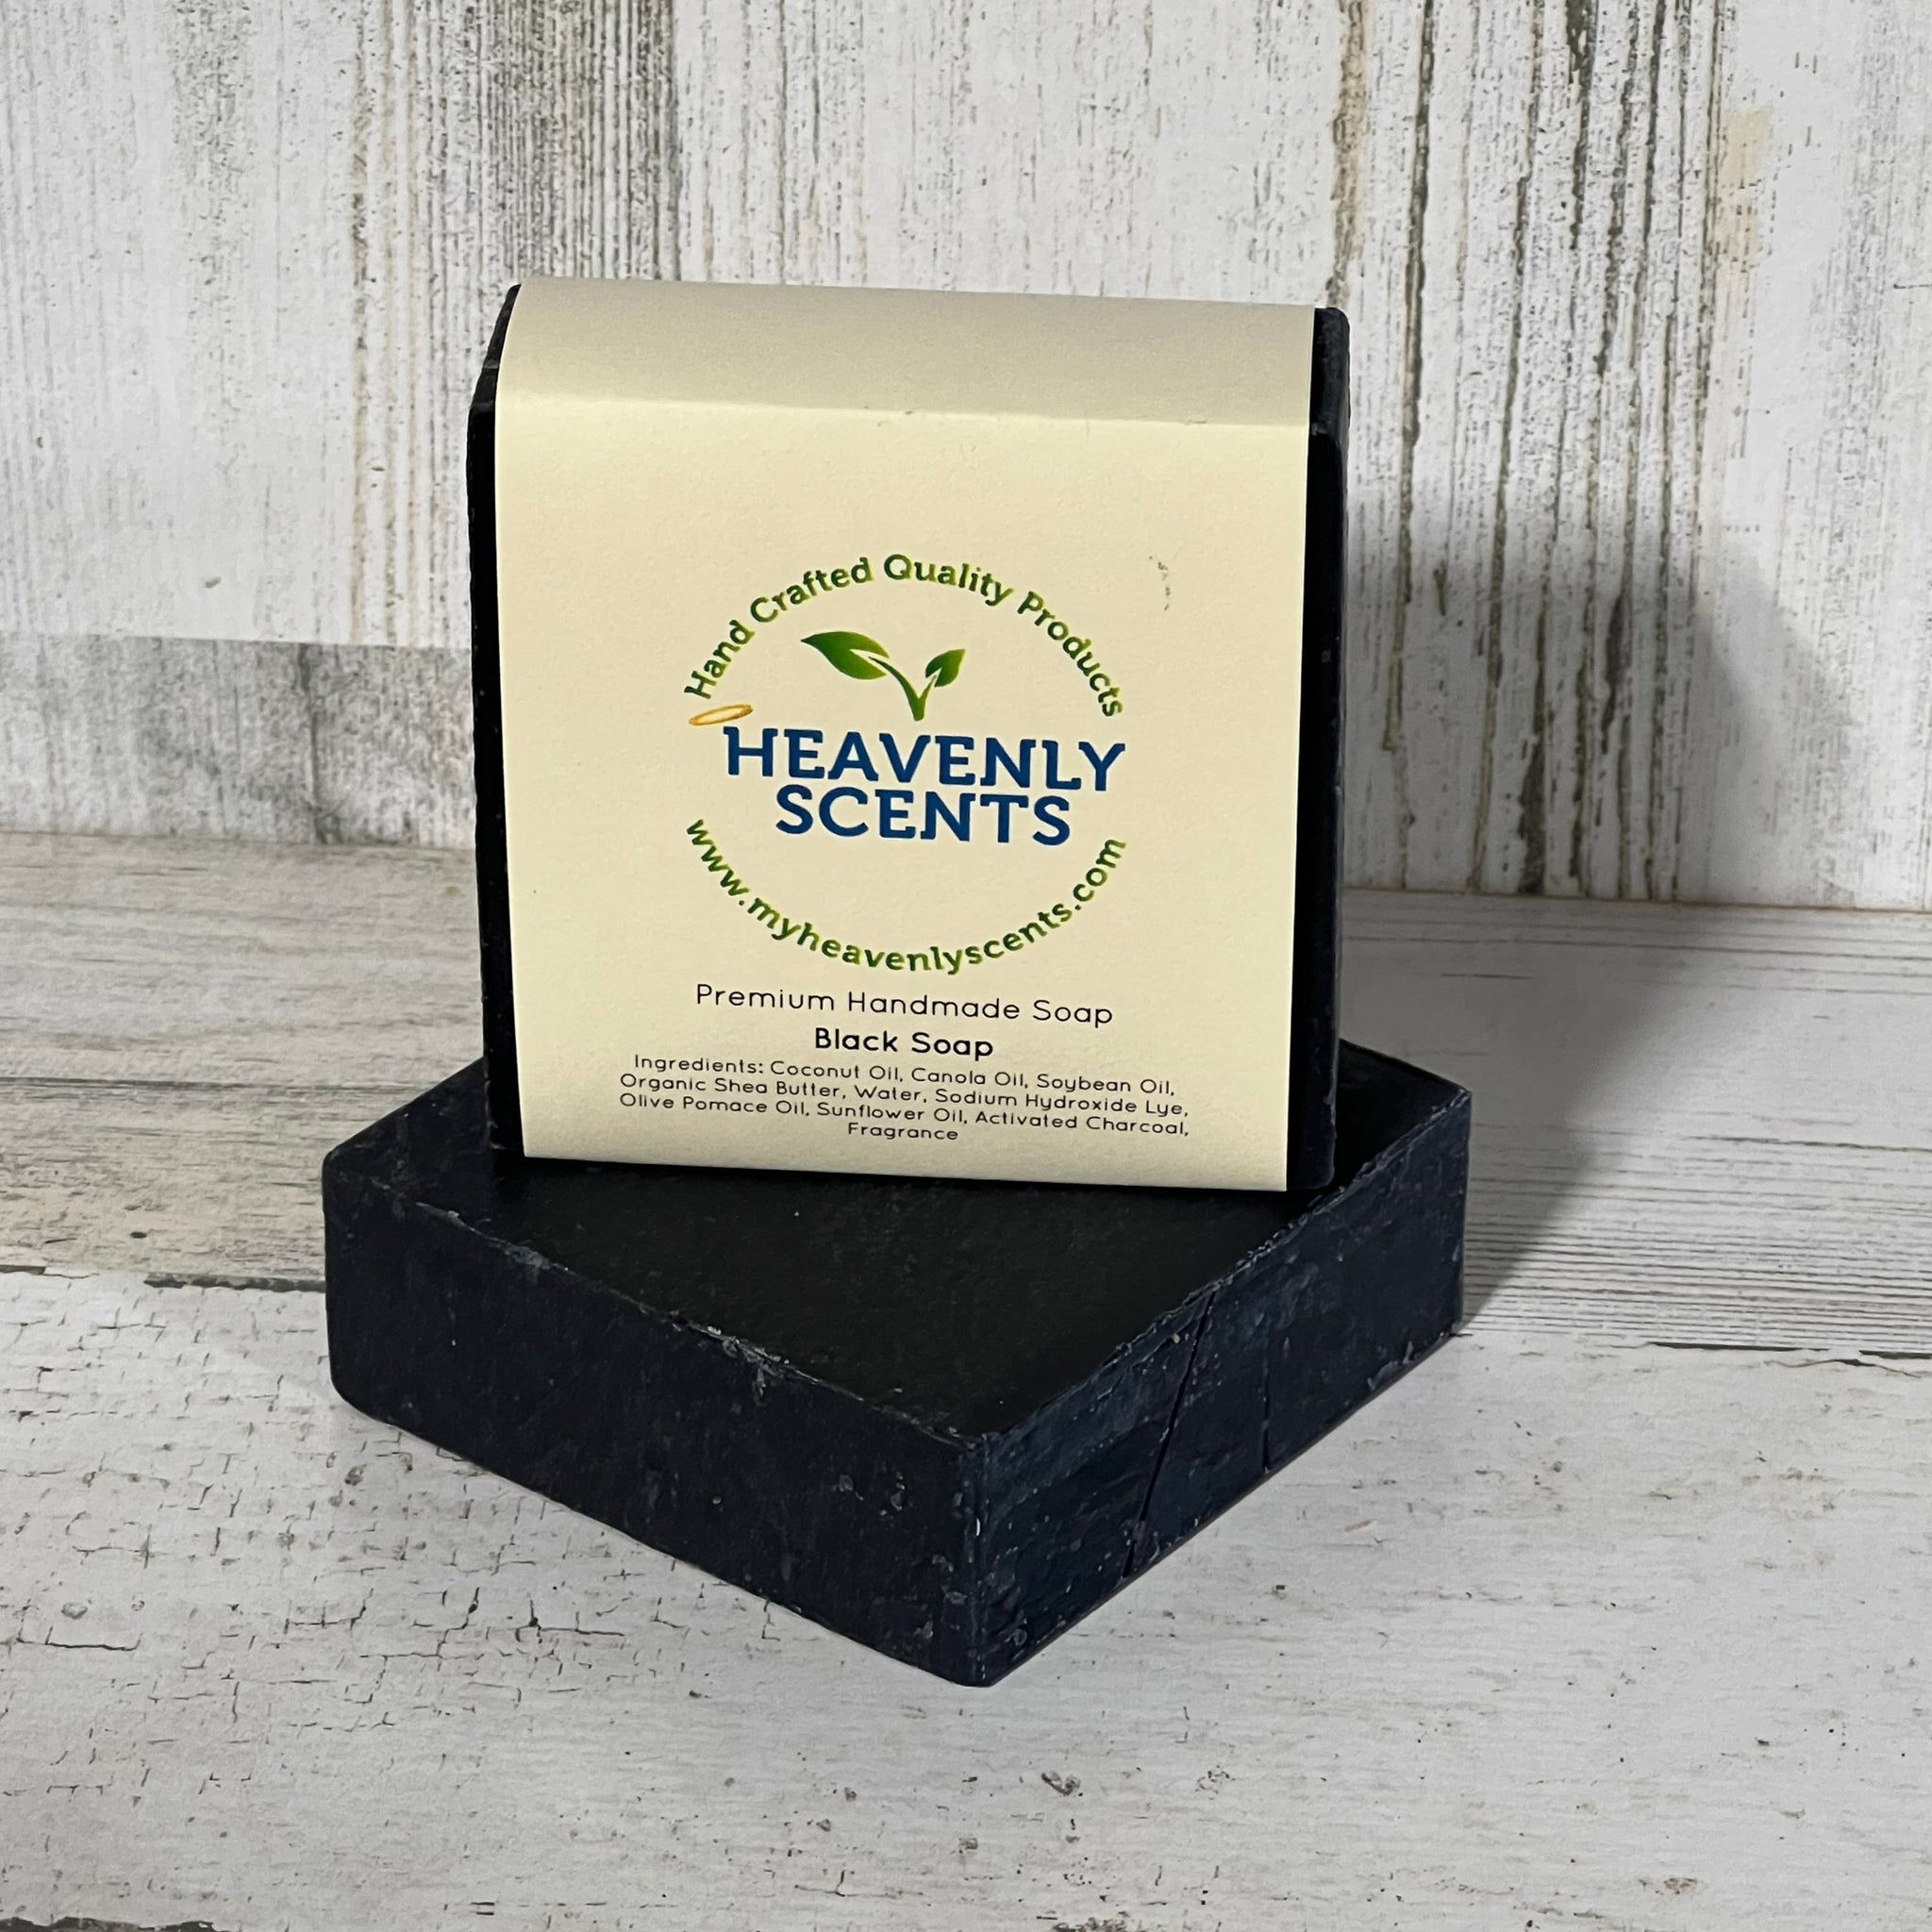 Black Charcoal Cold Processed Soap Myheavenlyscents